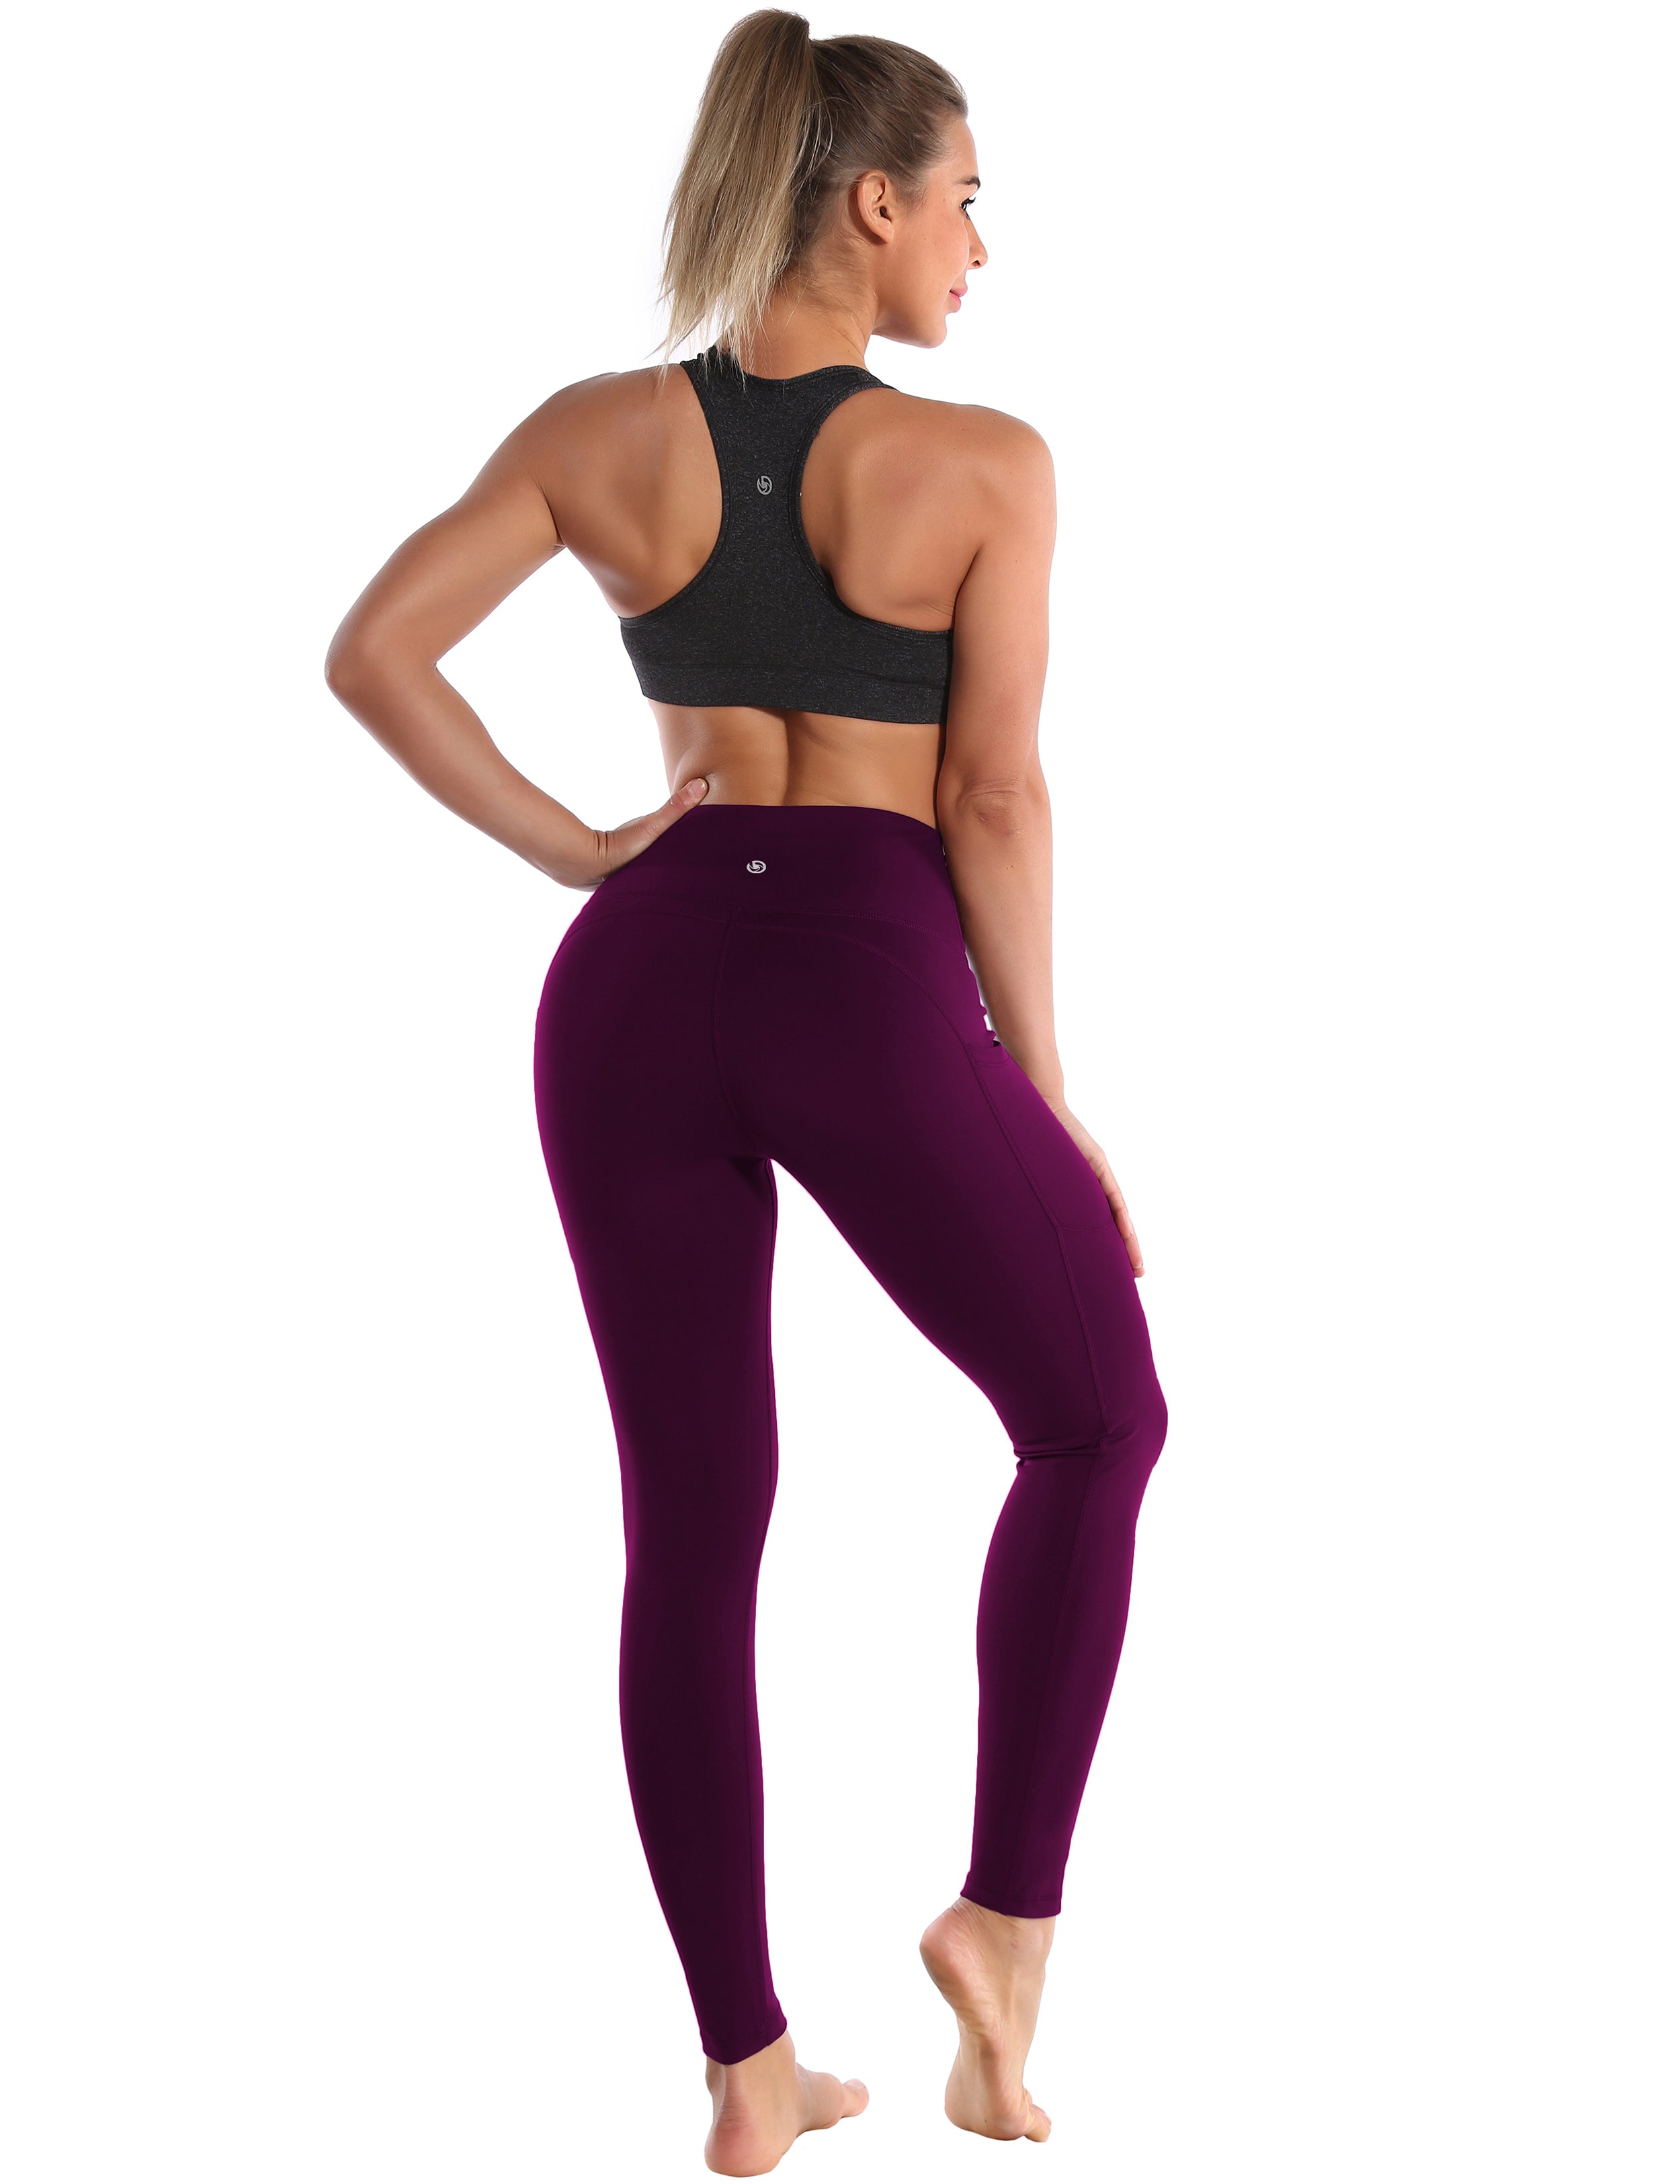 Hip Line Side Pockets Pilates Pants plum Sexy Hip Line Side Pockets 75%Nylon/25%Spandex Fabric doesn't attract lint easily 4-way stretch No see-through Moisture-wicking Tummy control Inner pocket Two lengths